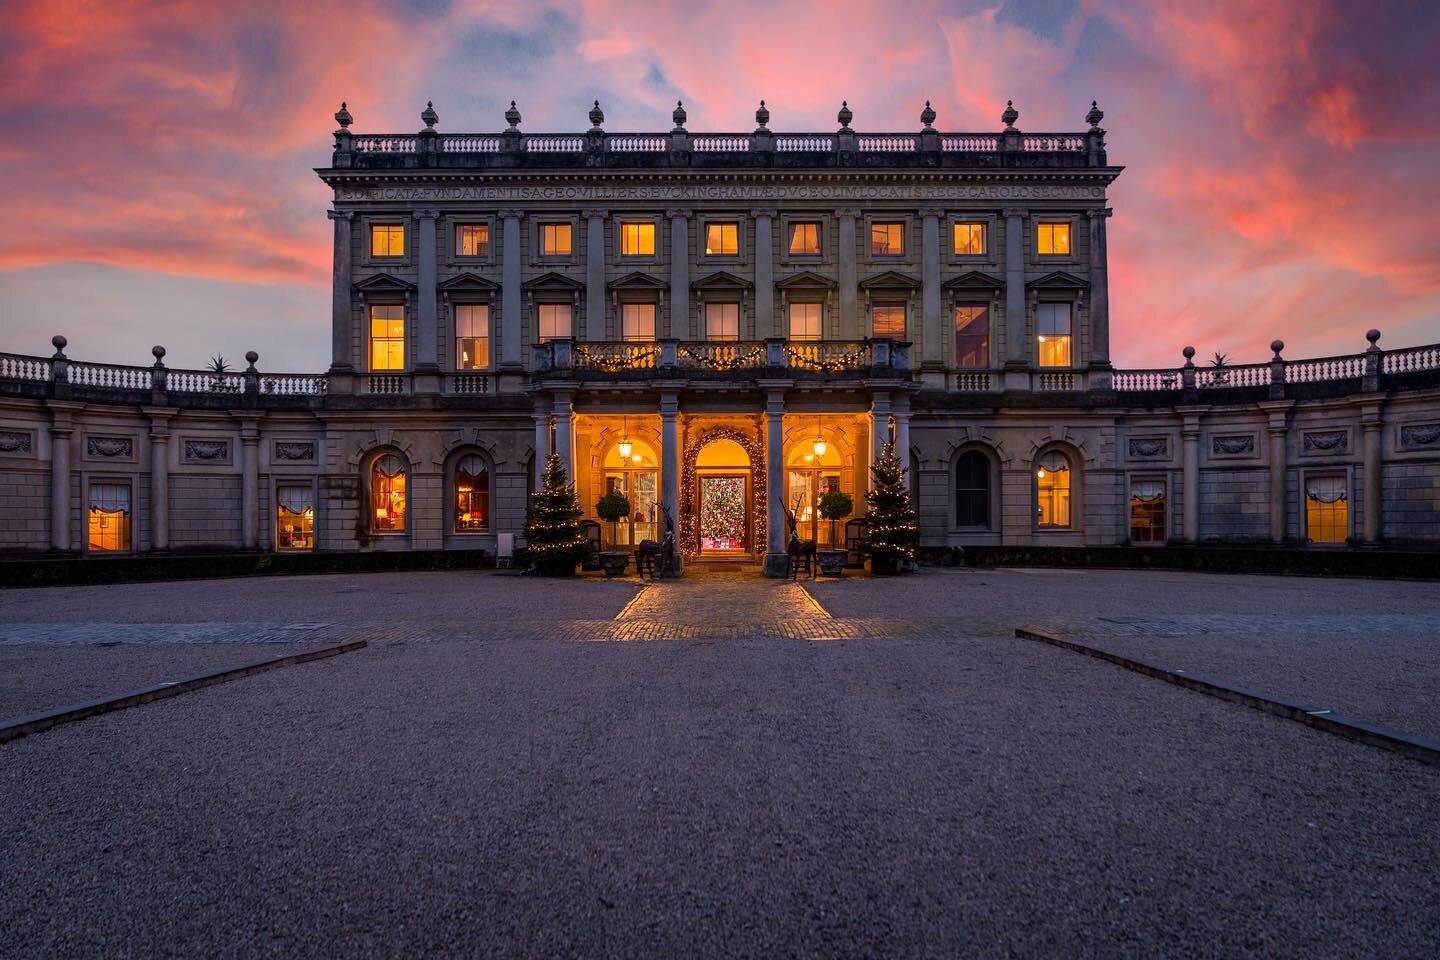 A few more shots of the beautiful Cliveden House all ready for Christmas #clivedenhouse